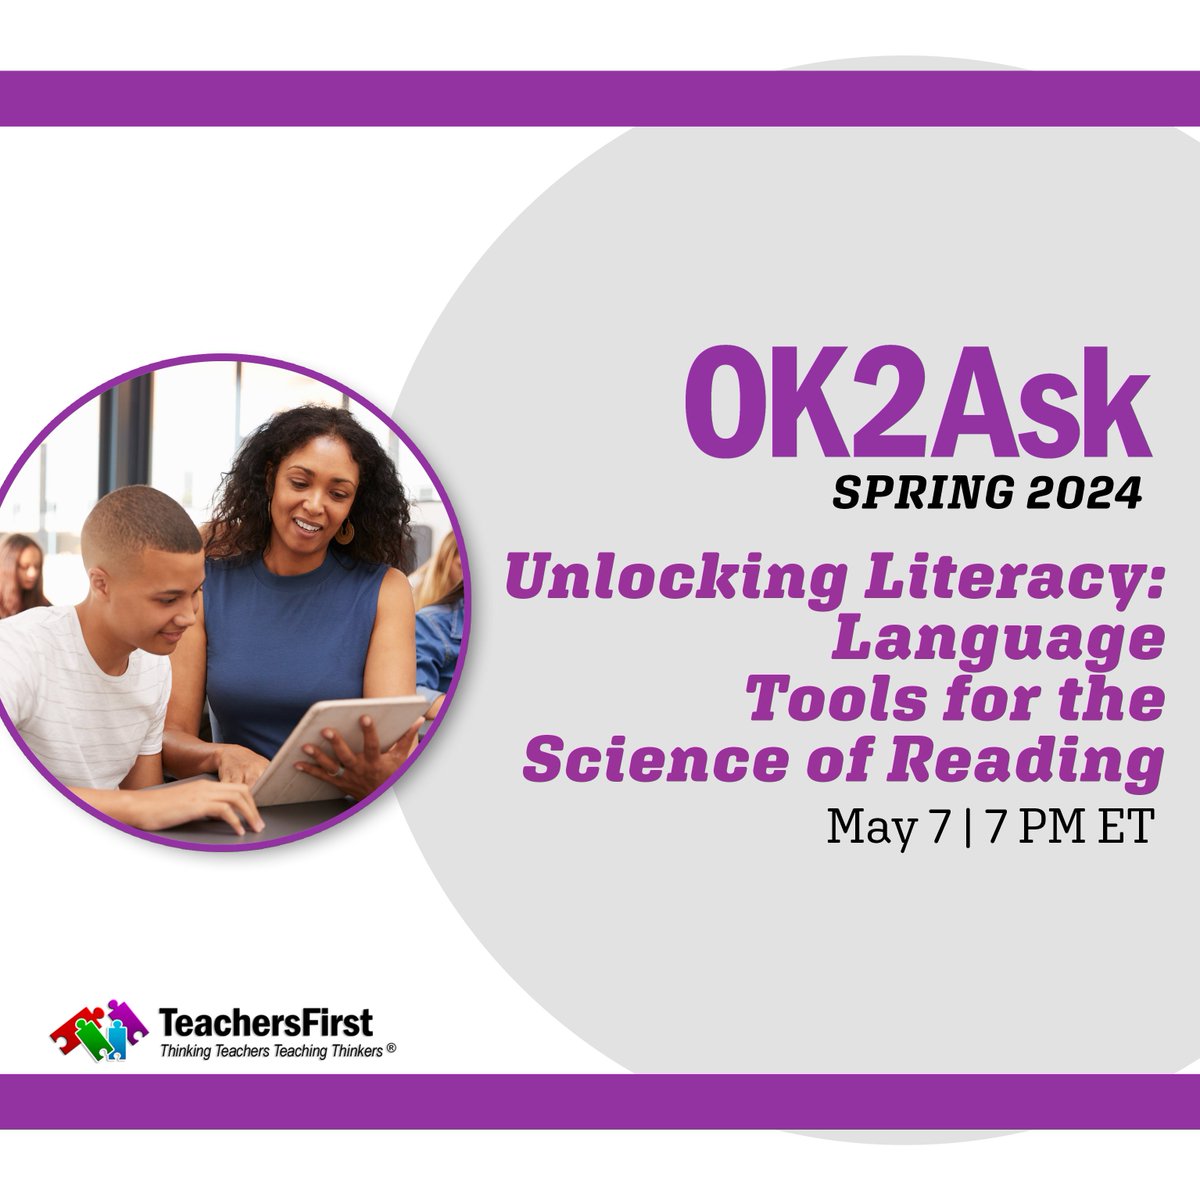 Join us tomorrow, 5/7, for a free virtual workshop and explore various tech tools available through Microsoft that can enhance oral language skills. Register: bit.ly/3vy9go5 #ScienceOfReading #SOR